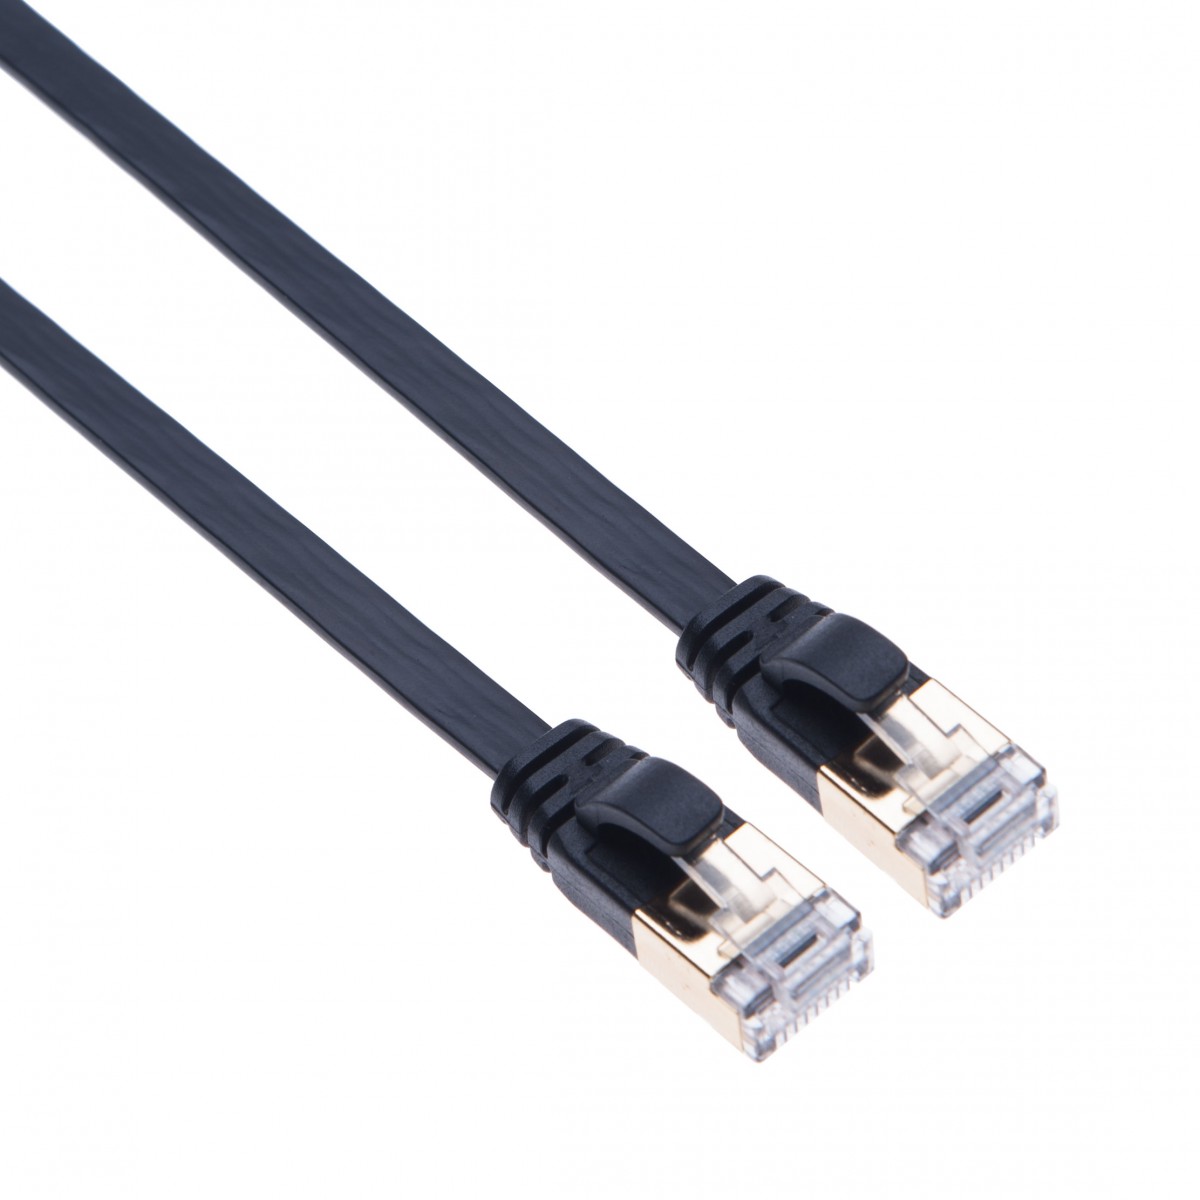 Short Ethernet Cable Cat 7 Gigabit Lan Network Switch Rj45 Patch 10 Gbps Cord For Smart Tv Samsung Lg Philips Toshiba Sony Tcl Sharp Networking Cat7 Wire Lead Stp 0 25m 0 82ft Keple Com